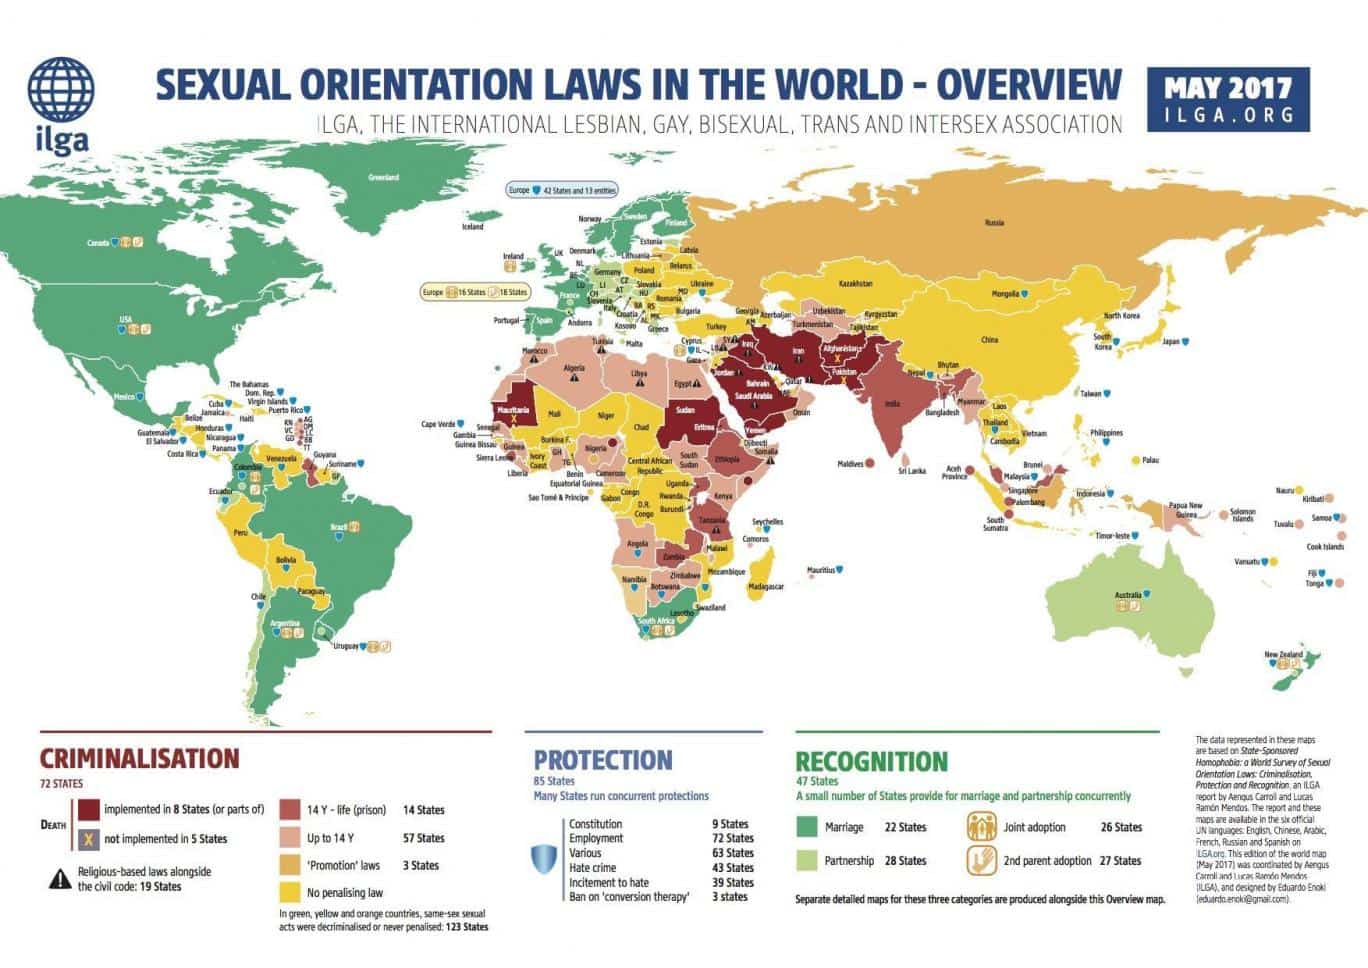 Sexual Orientation Laws Around the World - Overview